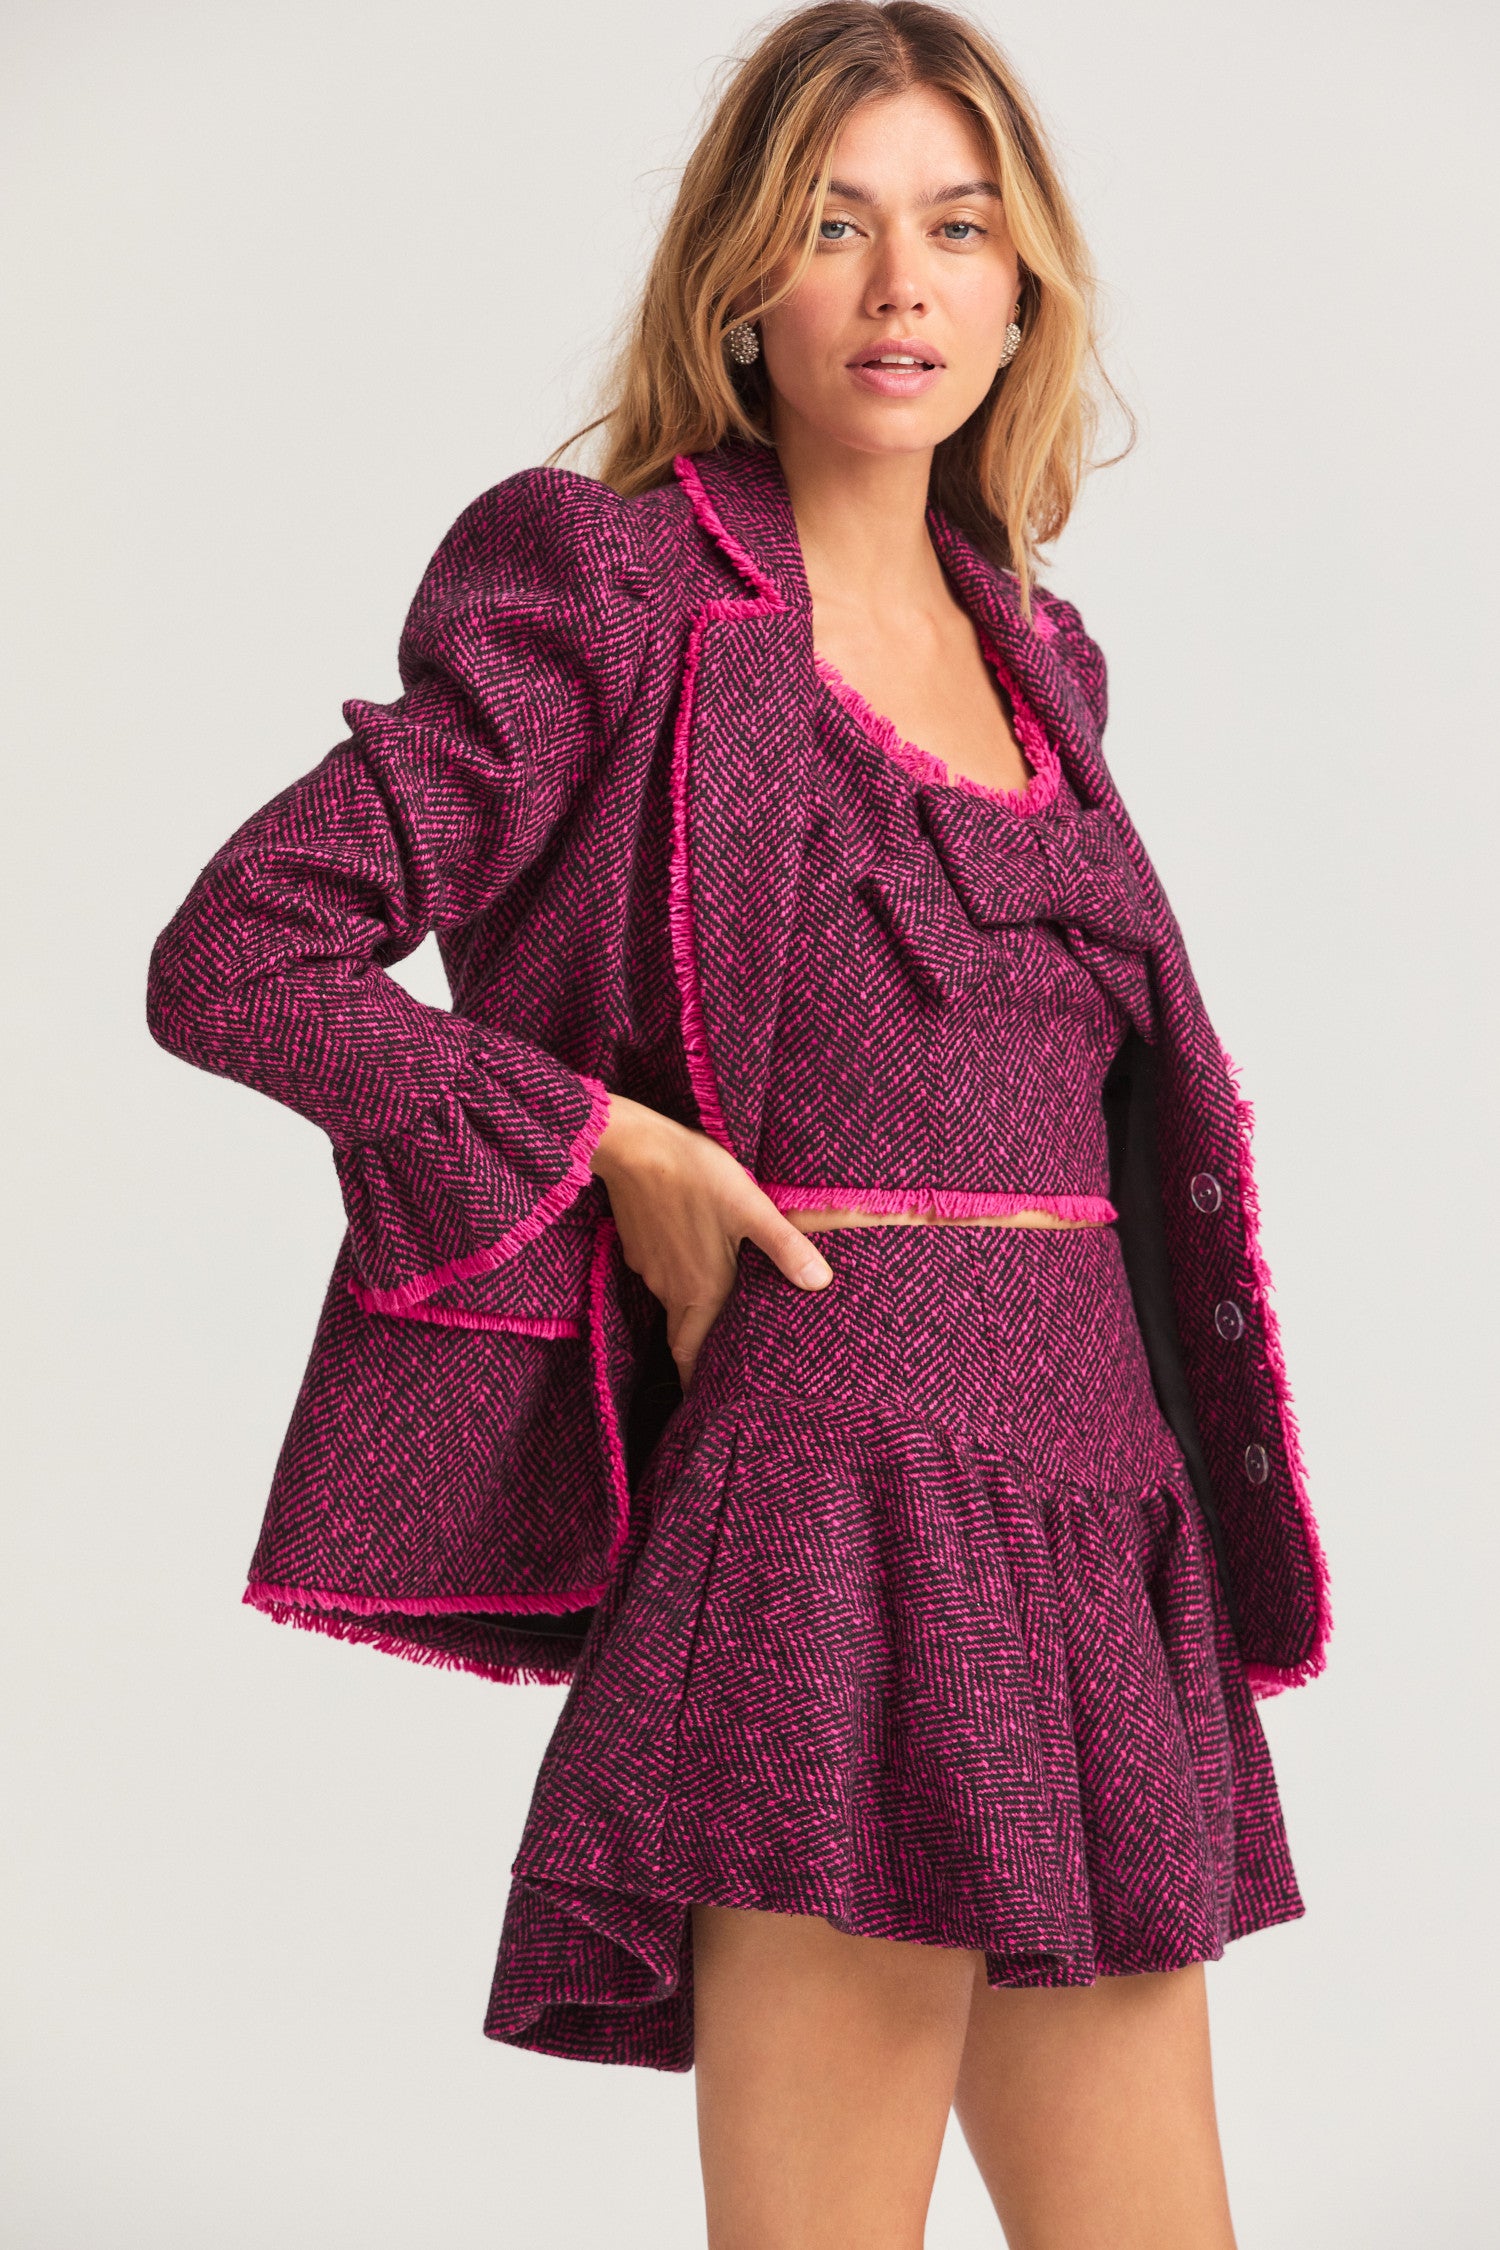 Fuchsia blazer with fraying details for a vintage look, slightly puffed shoulders, a ruffled cuff, flat pockets, and three self-covered buttons.